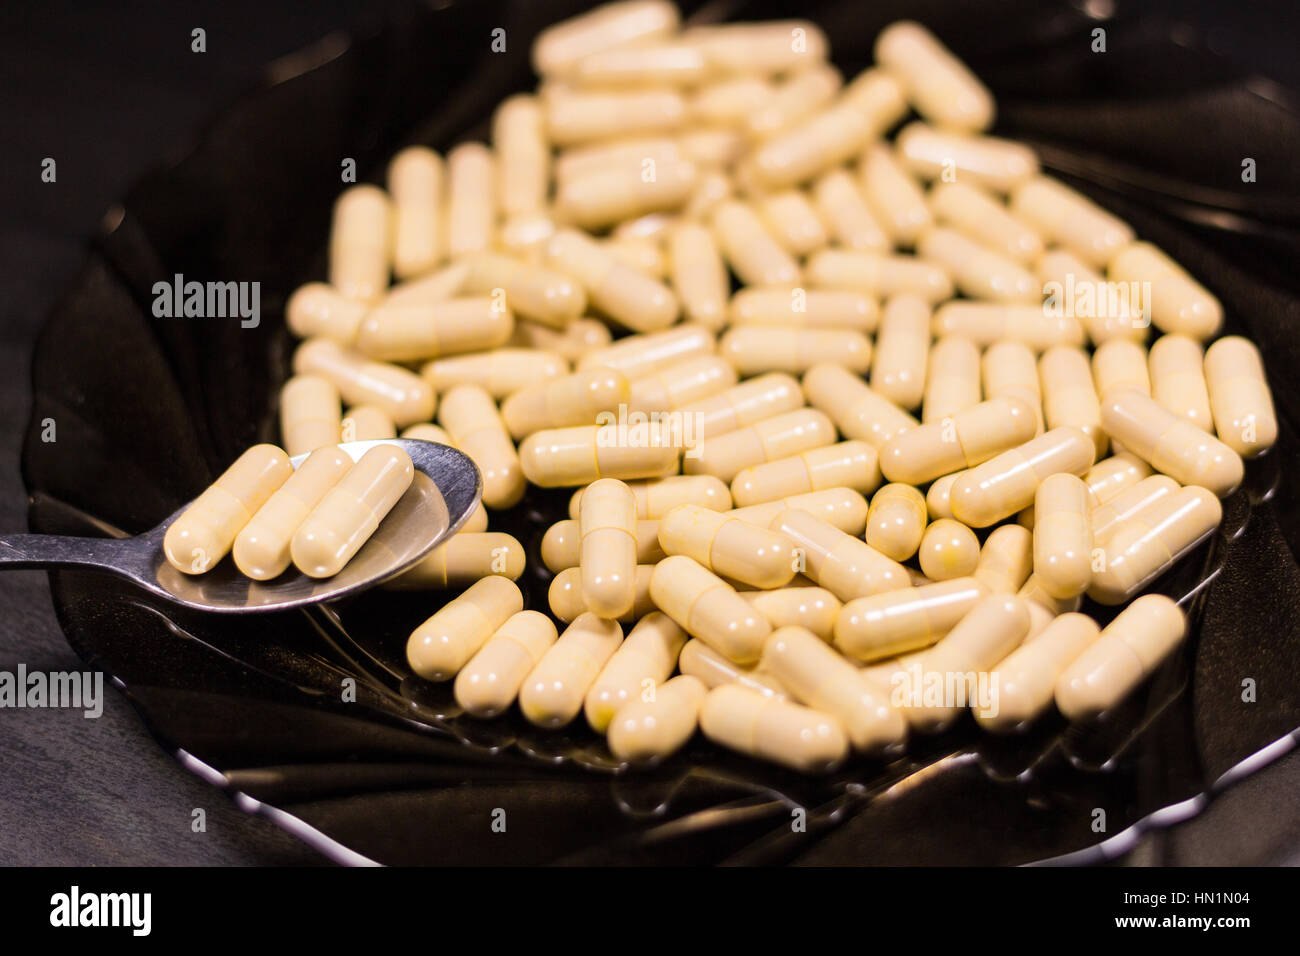 Spoonful of medicine capsules on a plate. Signifying drug addiction, healthy eating and lifestyle, dieting and slimming Stock Photo